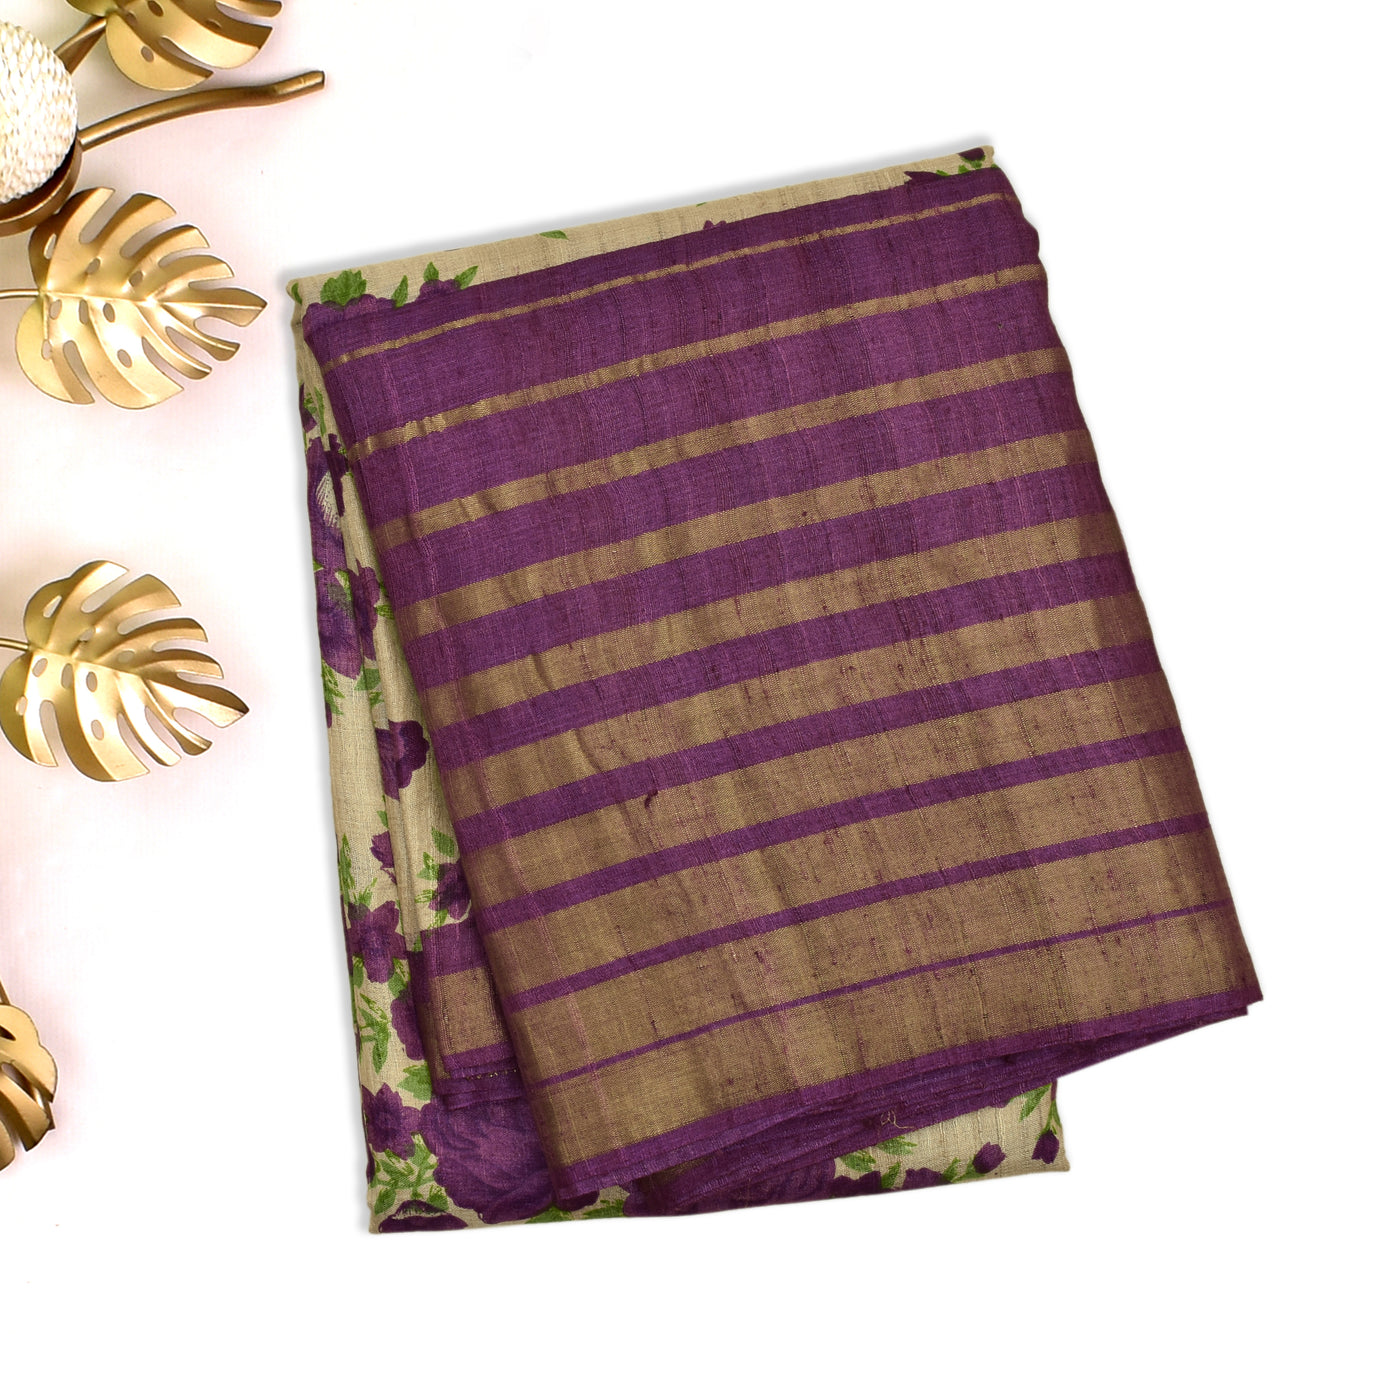 Off White Tussar Silk Saree with Floral Print Design